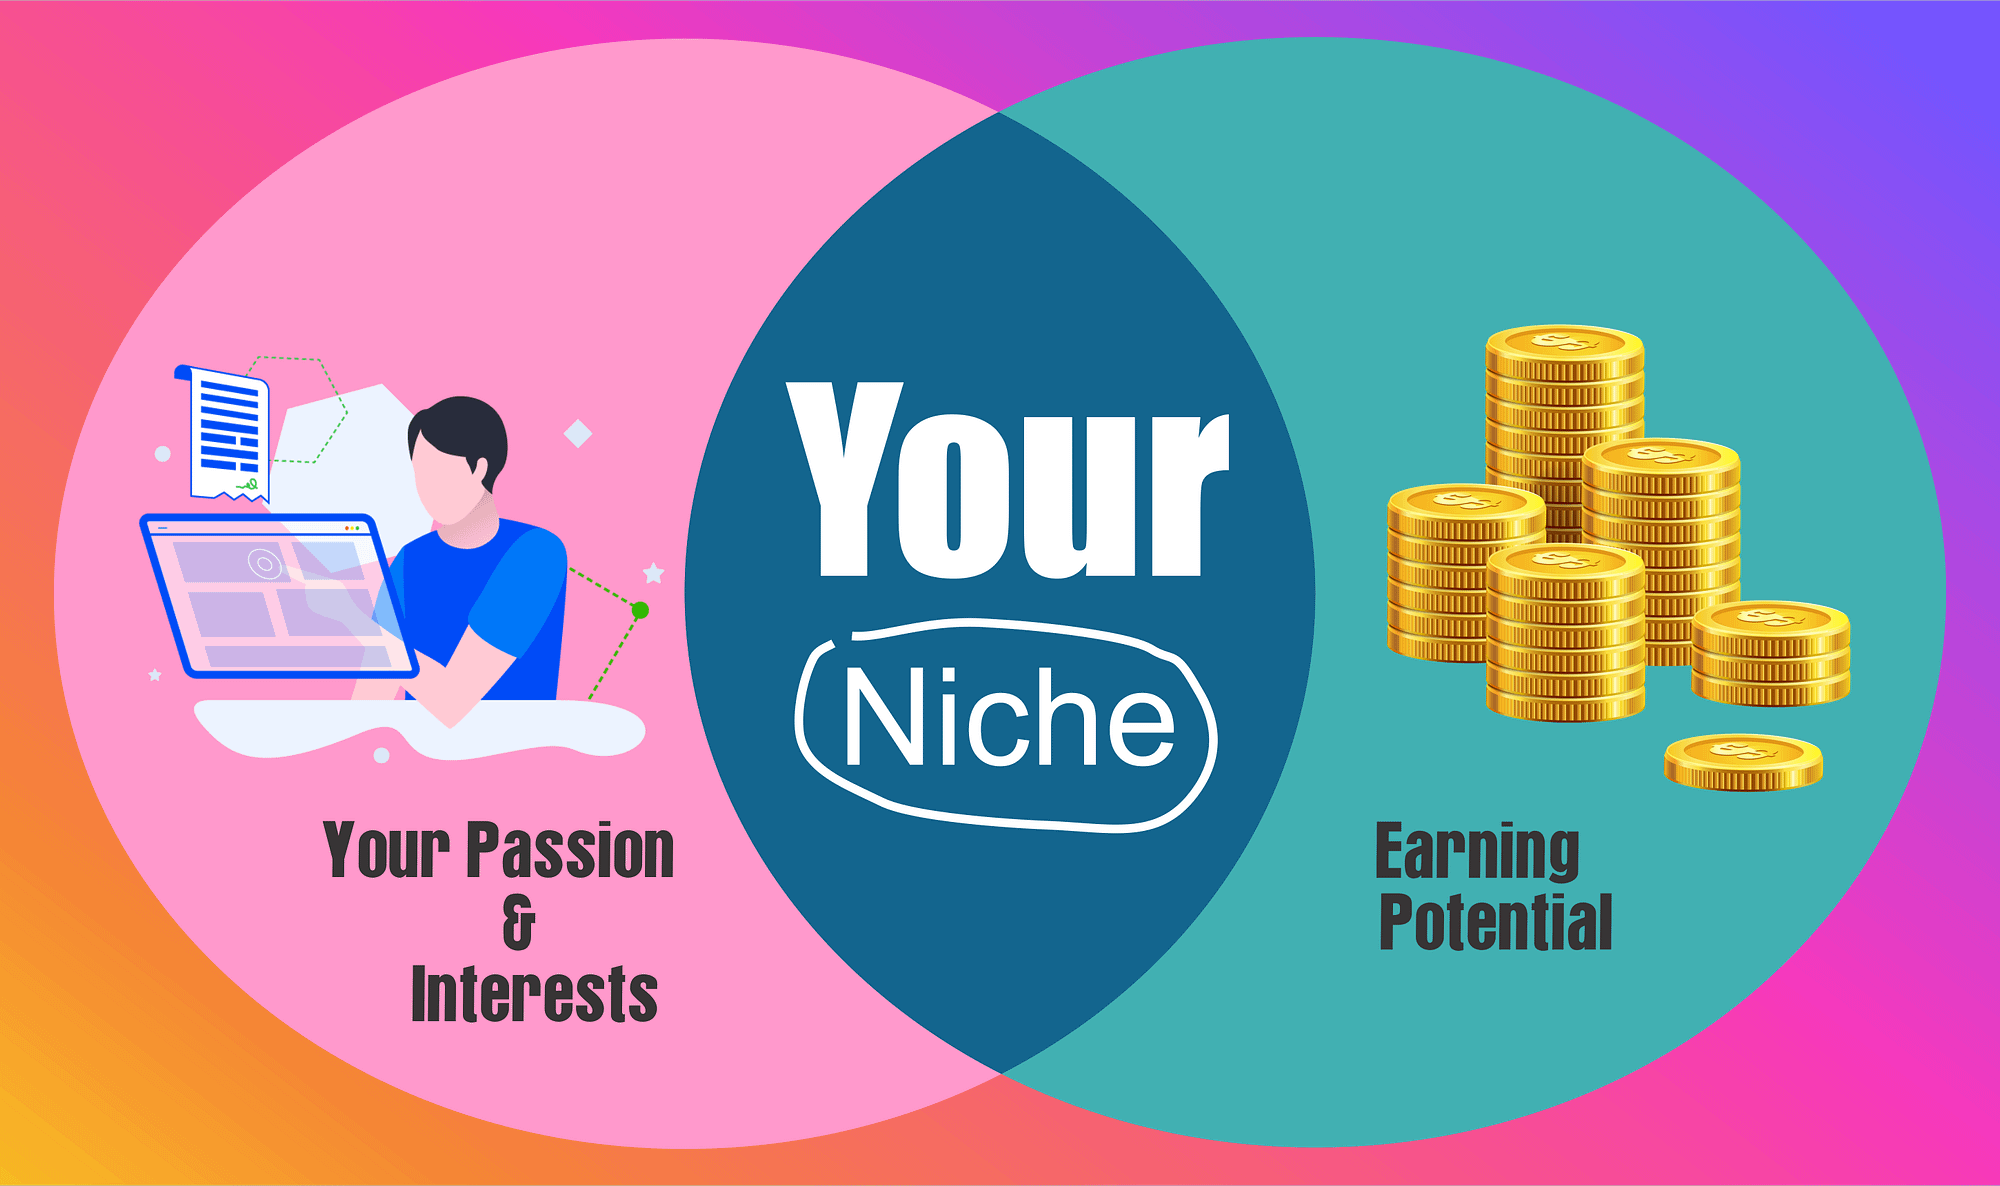 Choose according to your niche